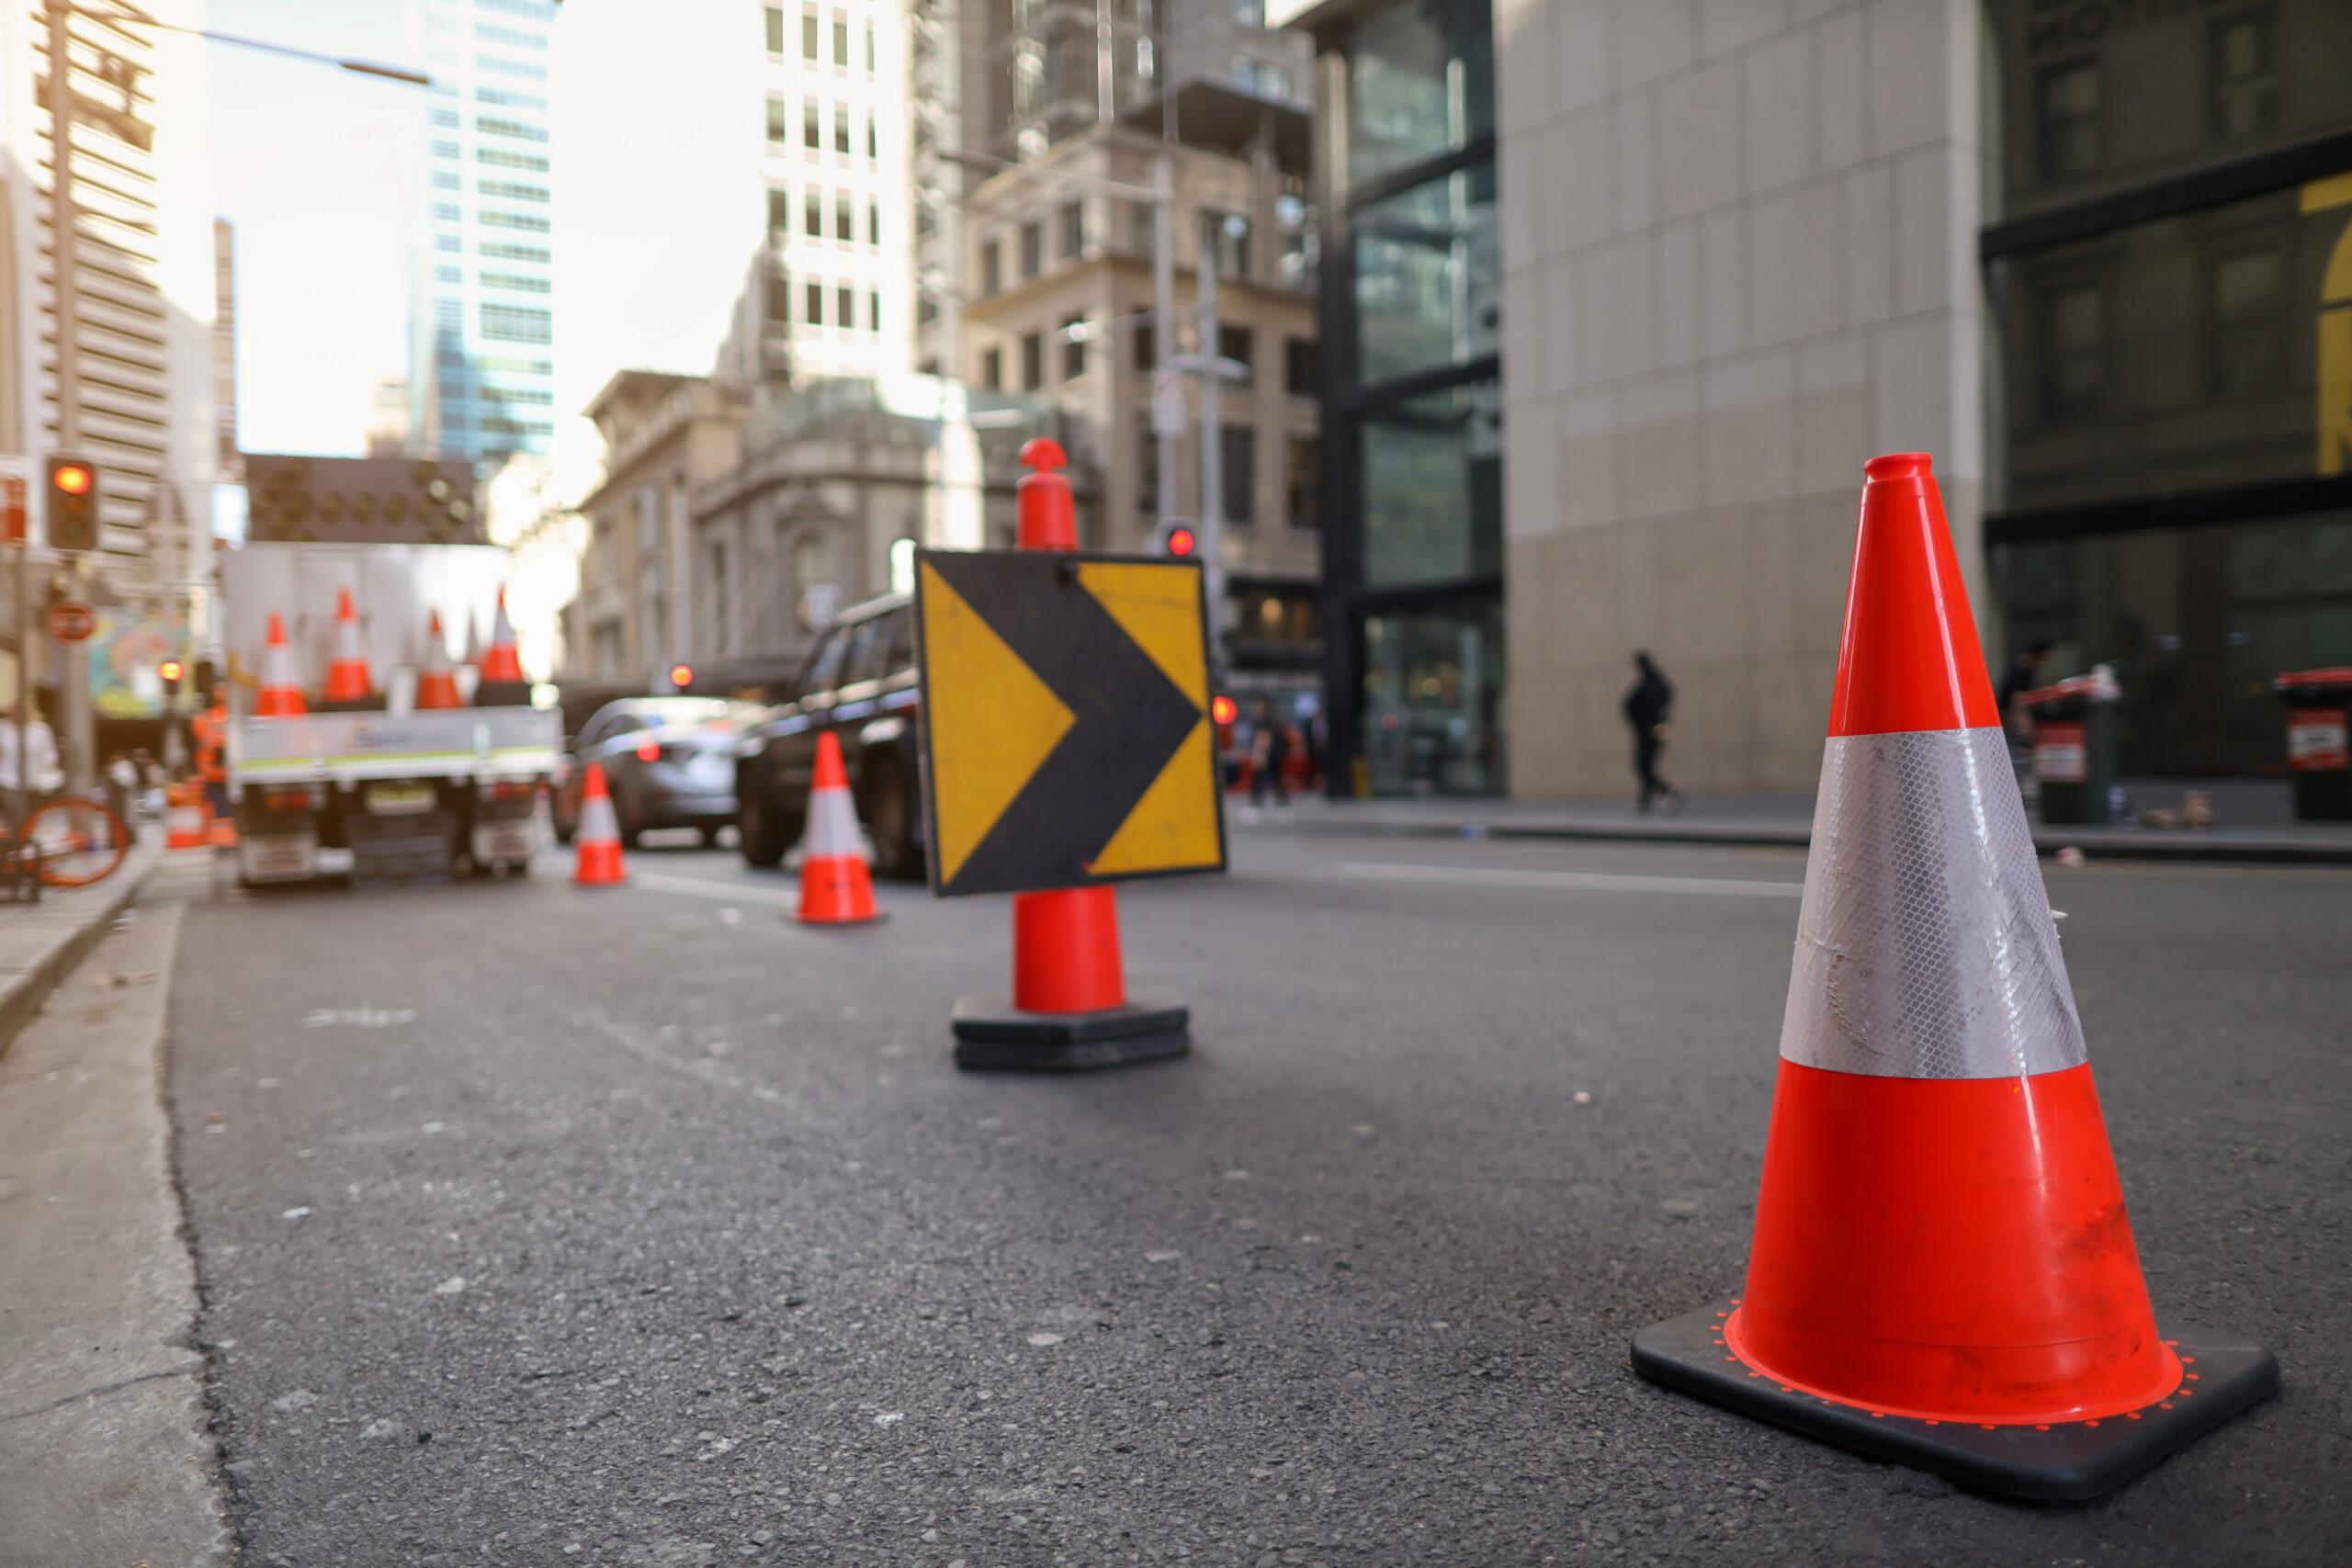 Traffic cones and a directional arrow sign on a city street with construction and high-rise buildings in the background.